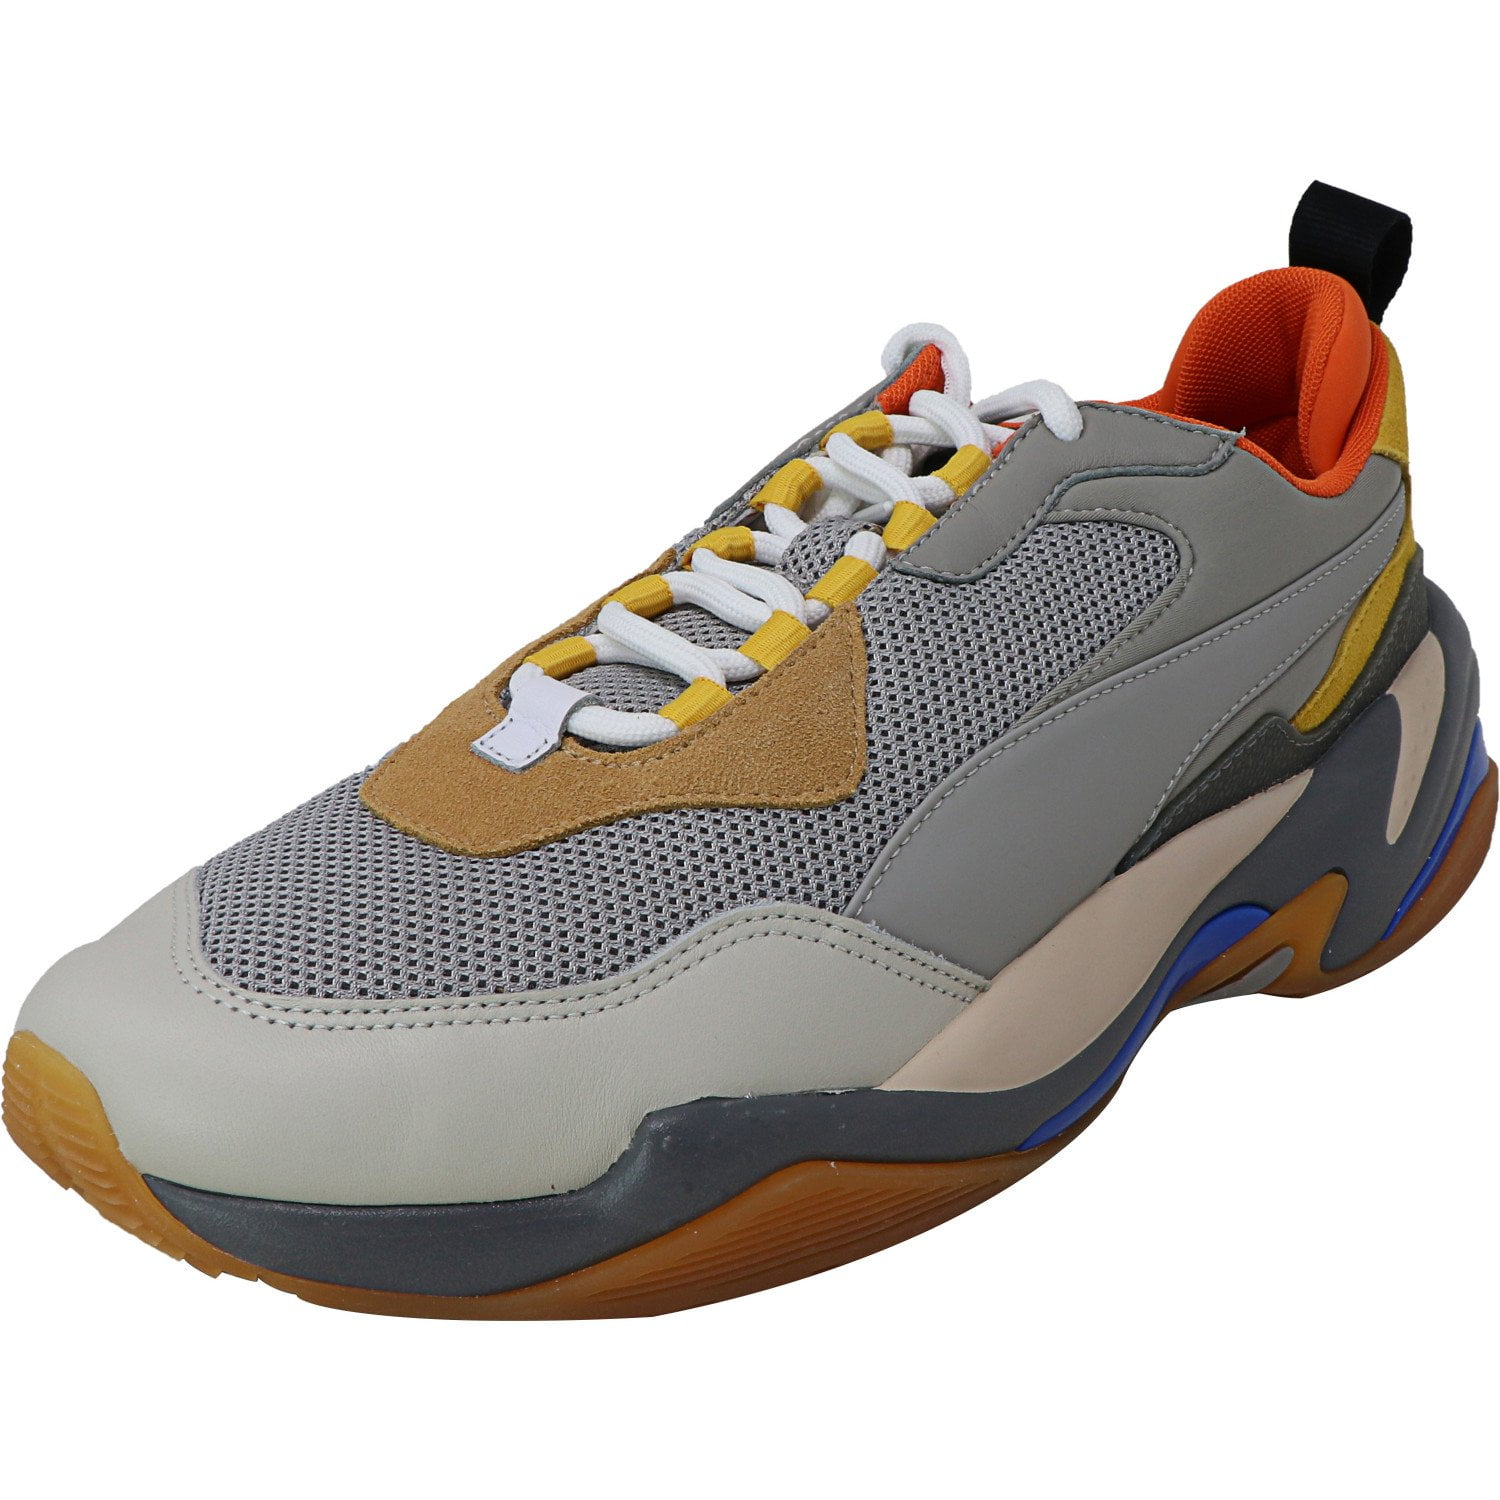 Puma Thunder Spectra Drizzle / Steel Gray Ankle-High Sneaker - 11.5M Walmart.com